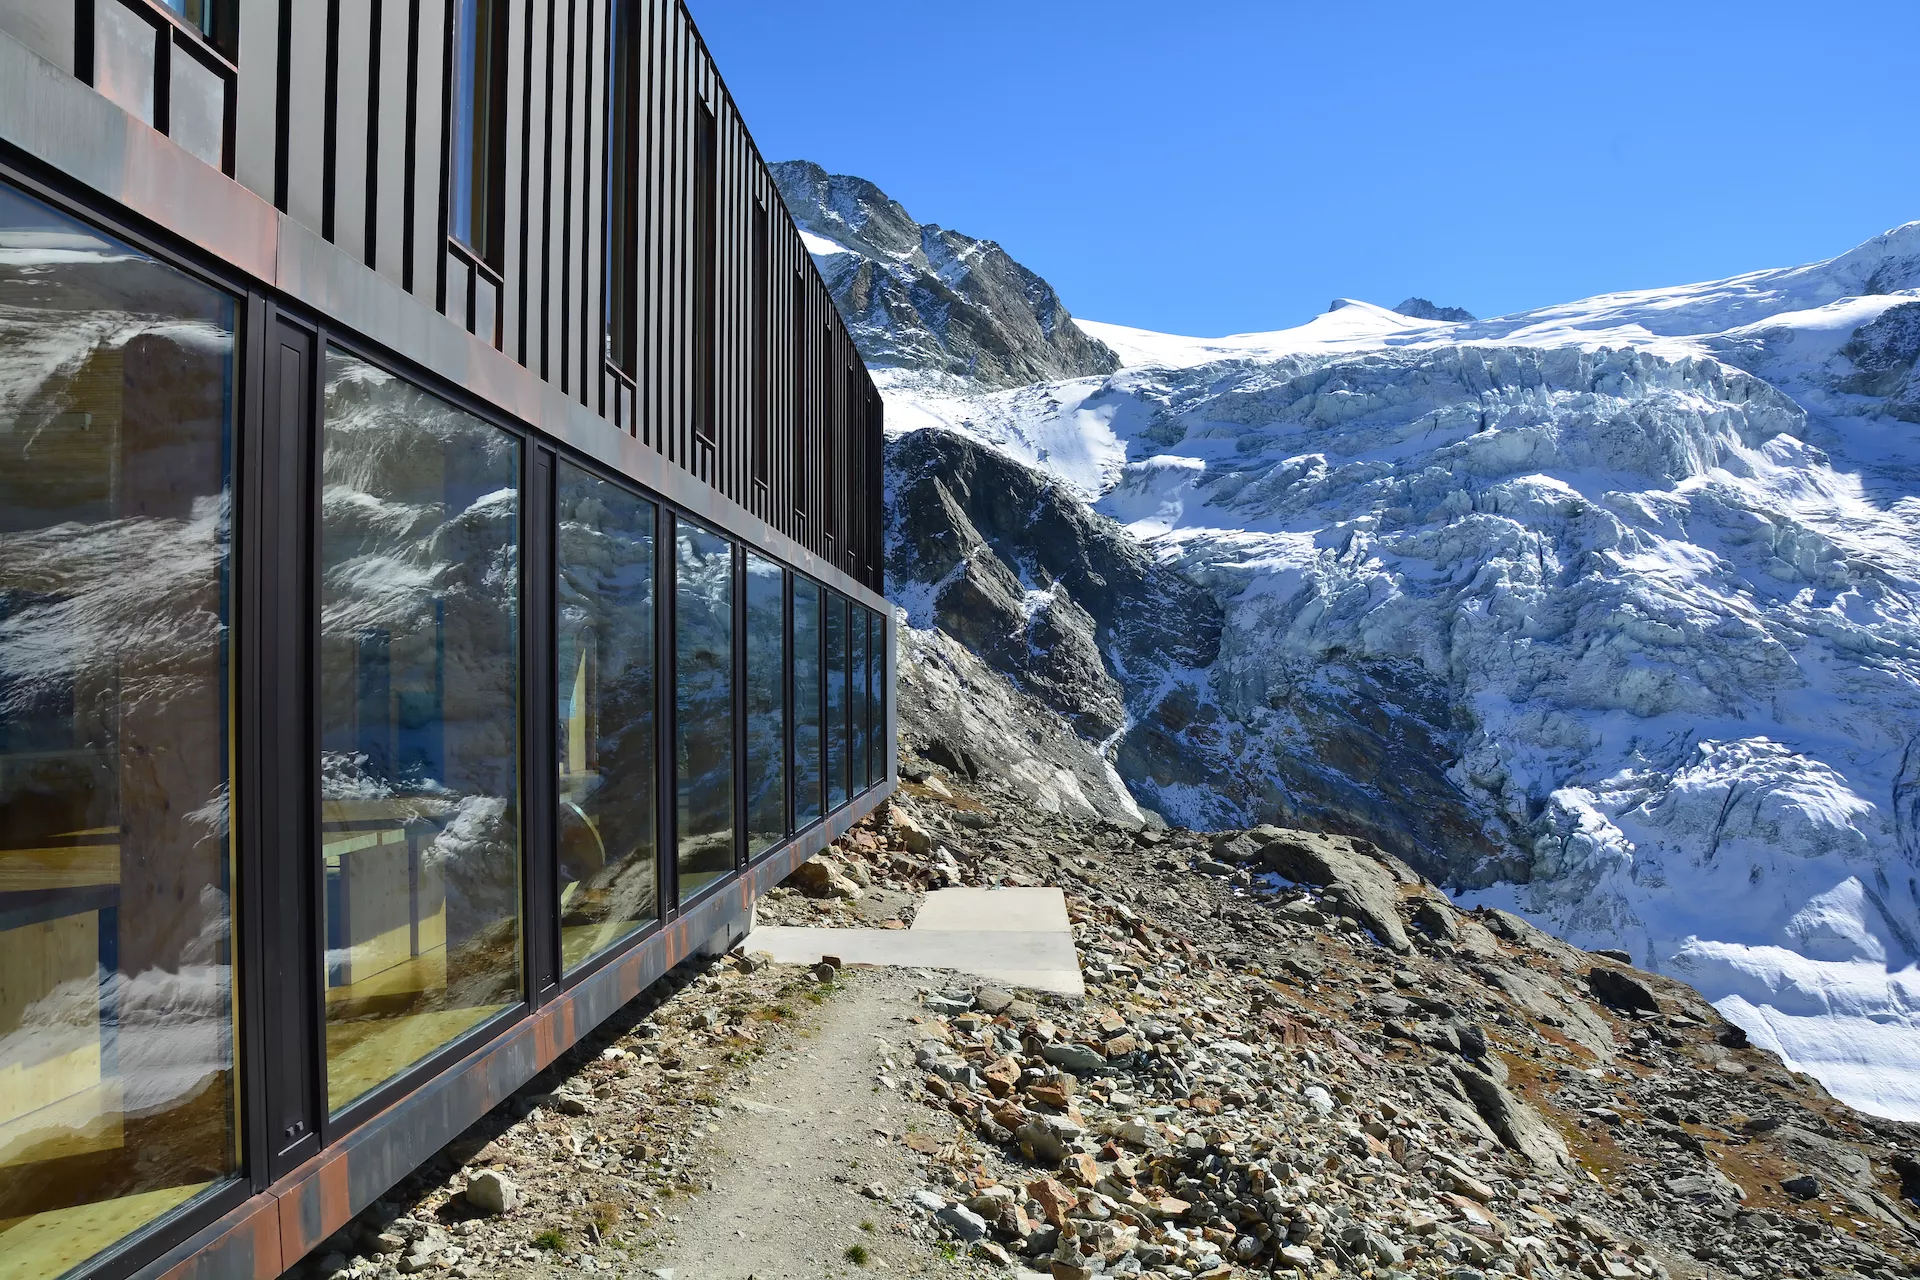 The Moiry Mountain Refuge in the Val d'Anniviers